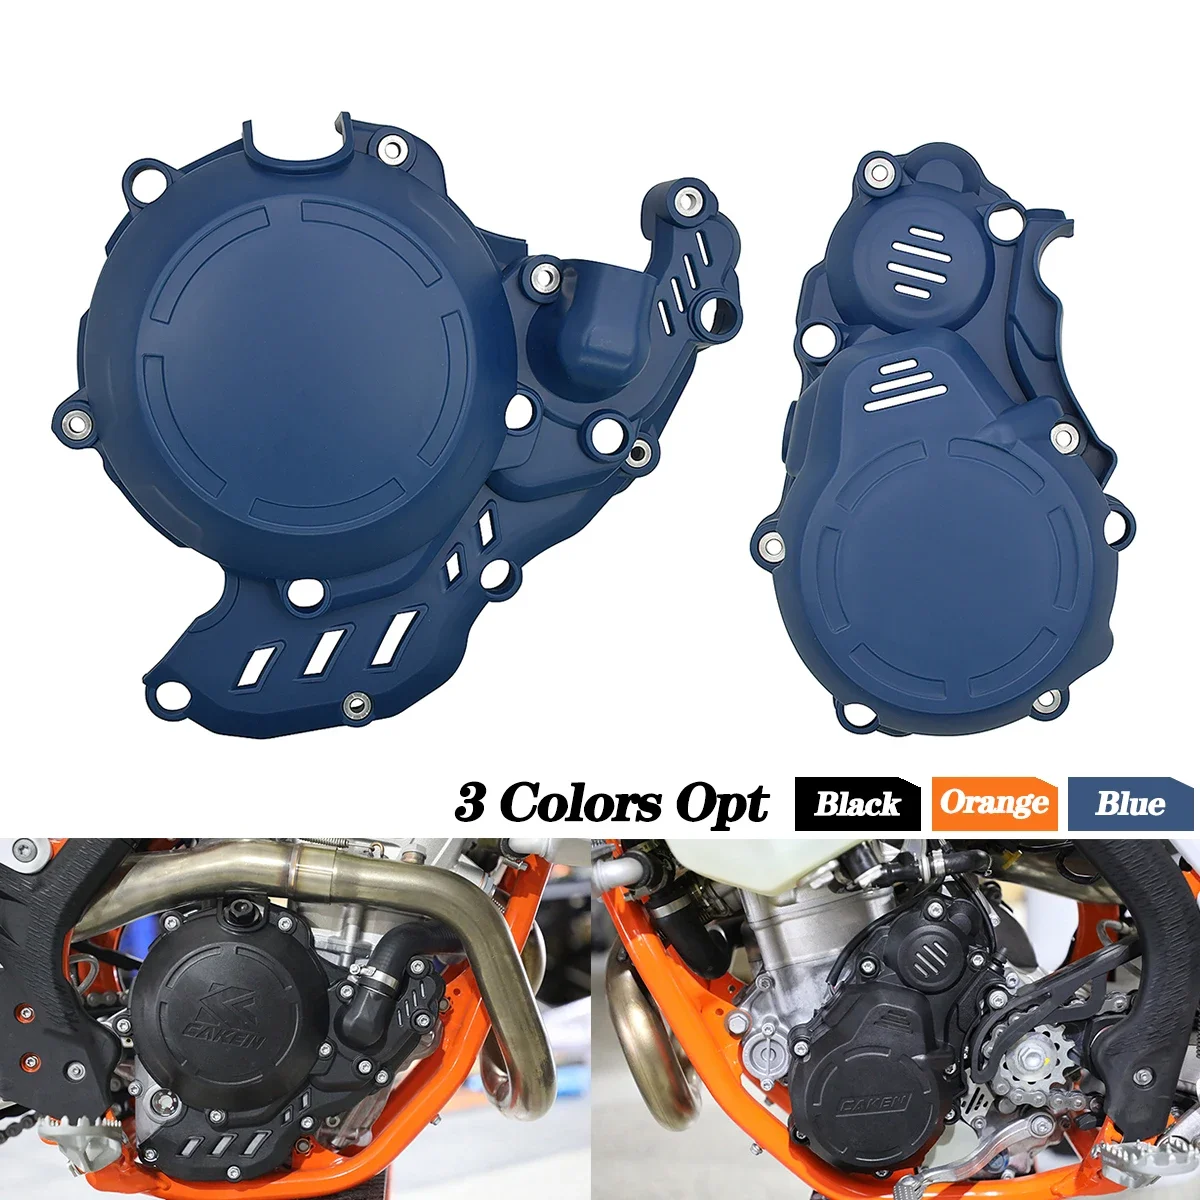 

Motorcycle Ignition Guard Cover Clutch Protector For Husqvarna FE250 FE350 FE350S For KTM EXC-F EXCF250 EXCF350 XCFW 2017-2022